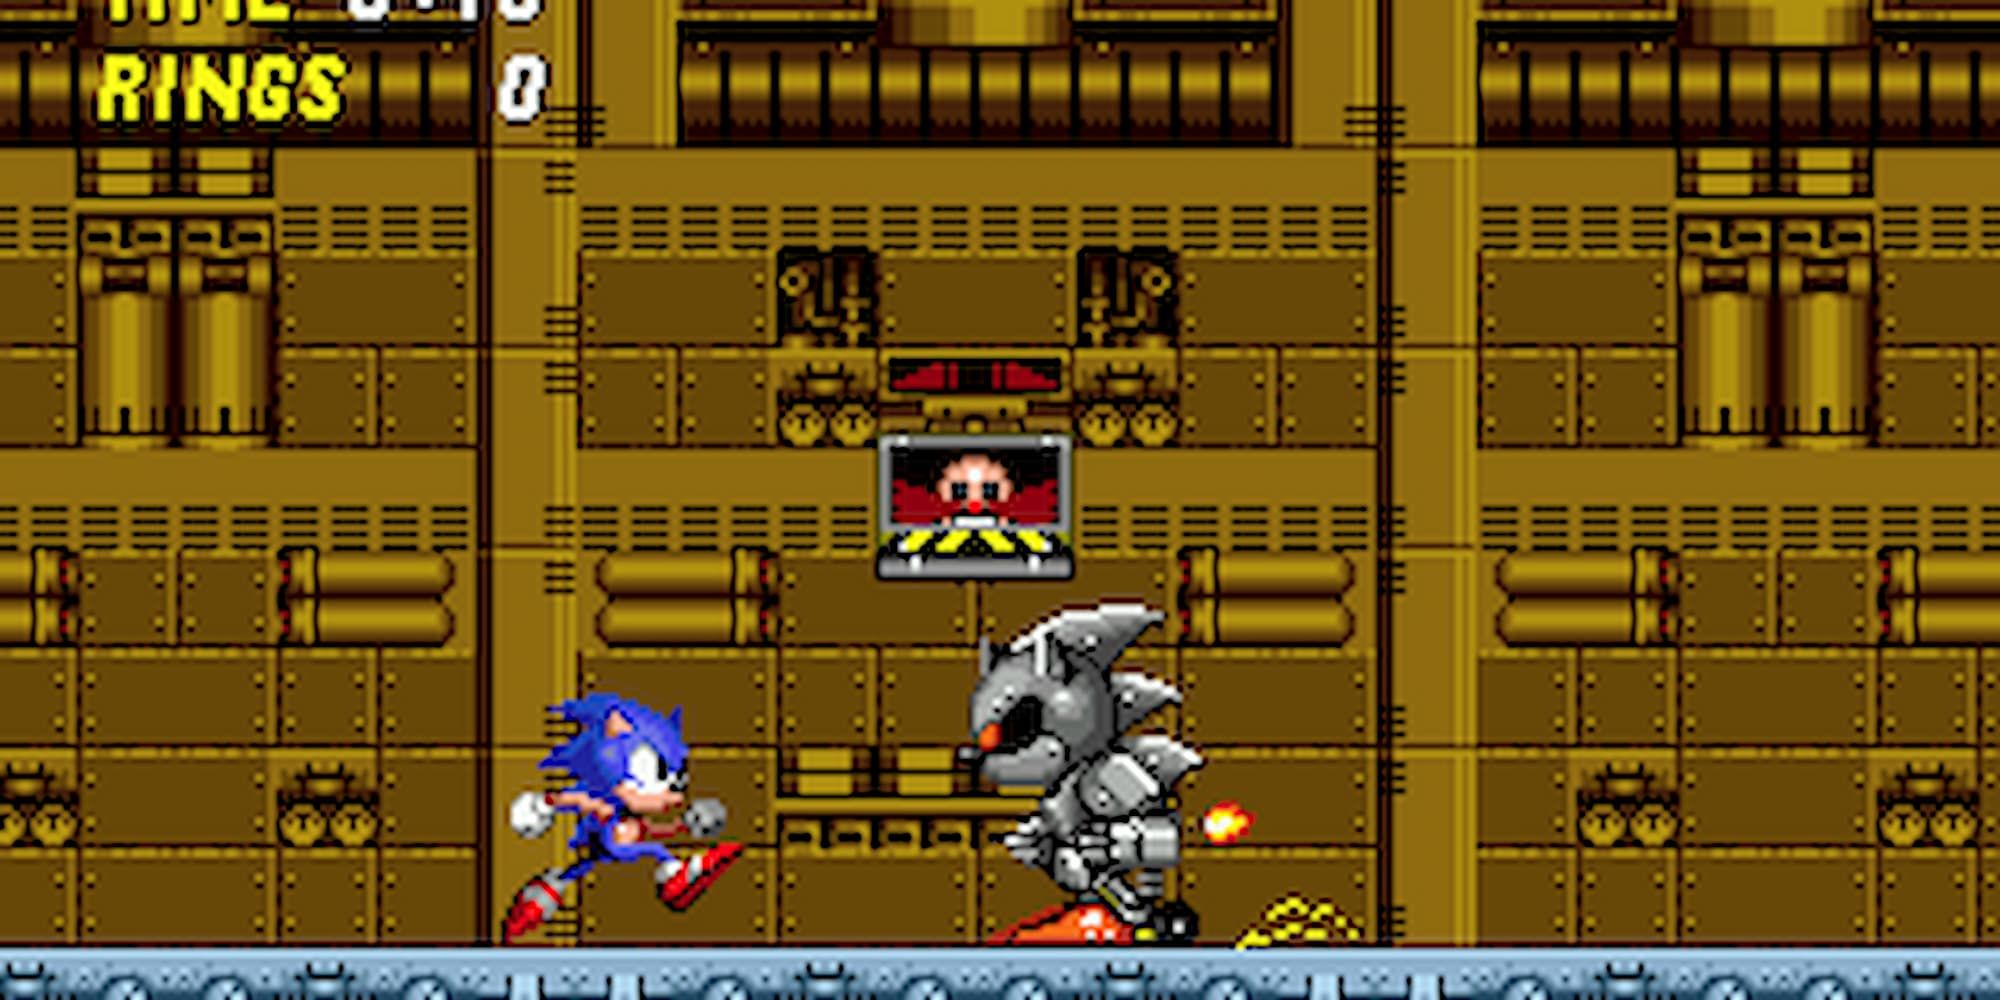 Sonic fighting Silver Sonic whilst Dr. Eggman watches